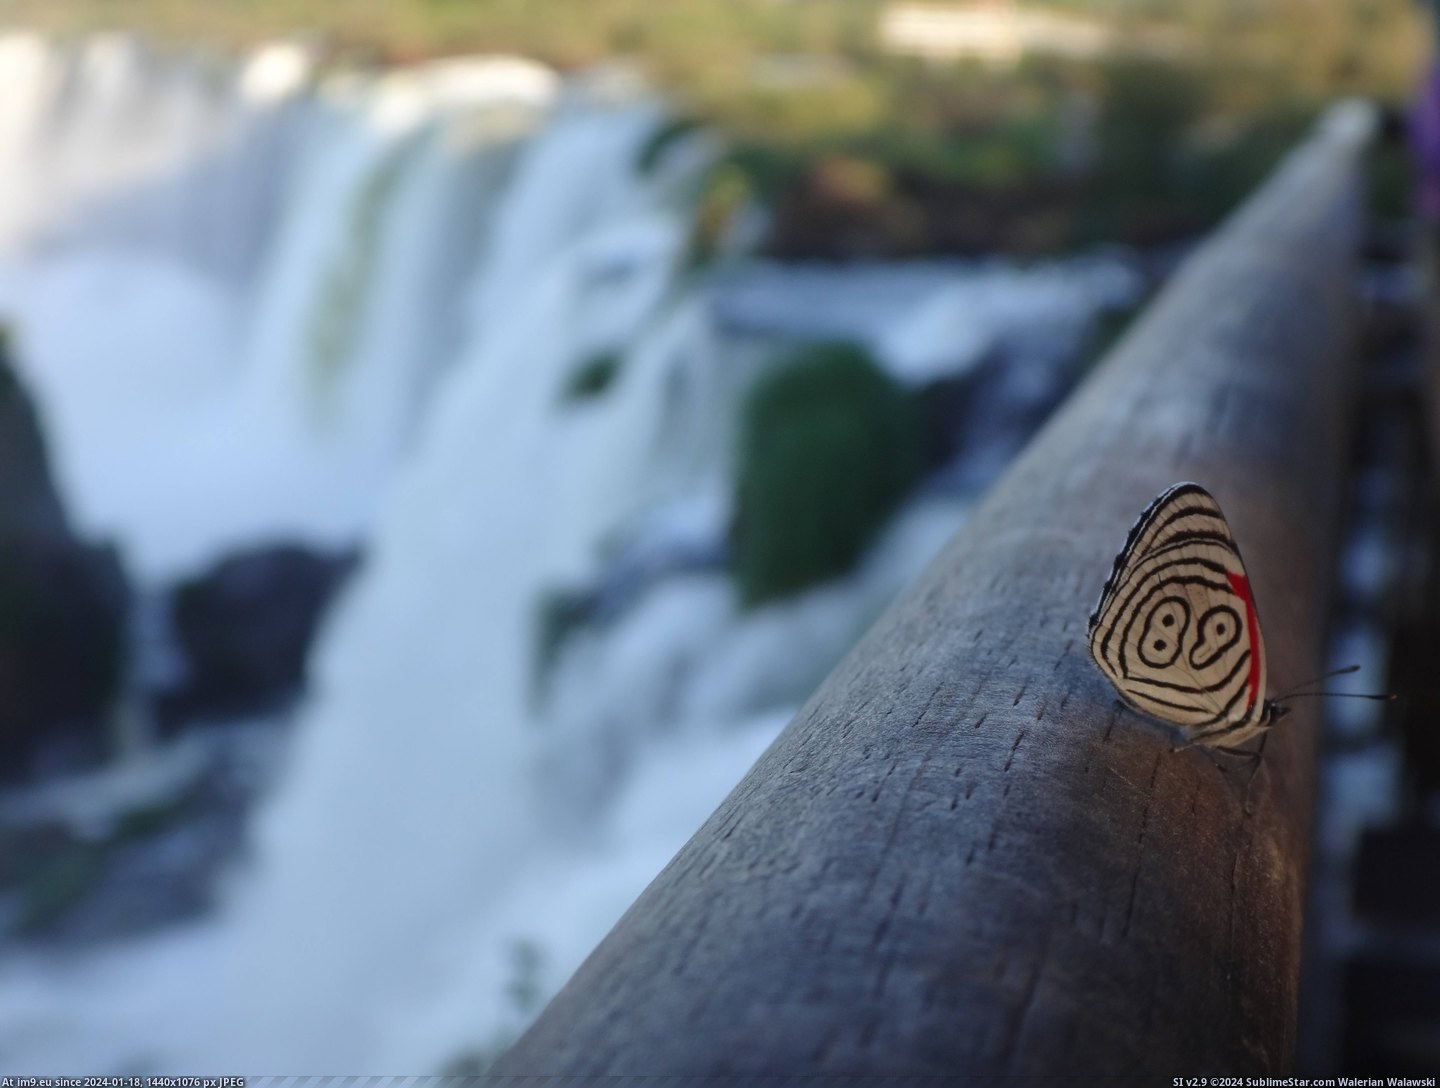 [Mildlyinteresting] This butterfly had the number 89 on its wing. (in My r/MILDLYINTERESTING favs)